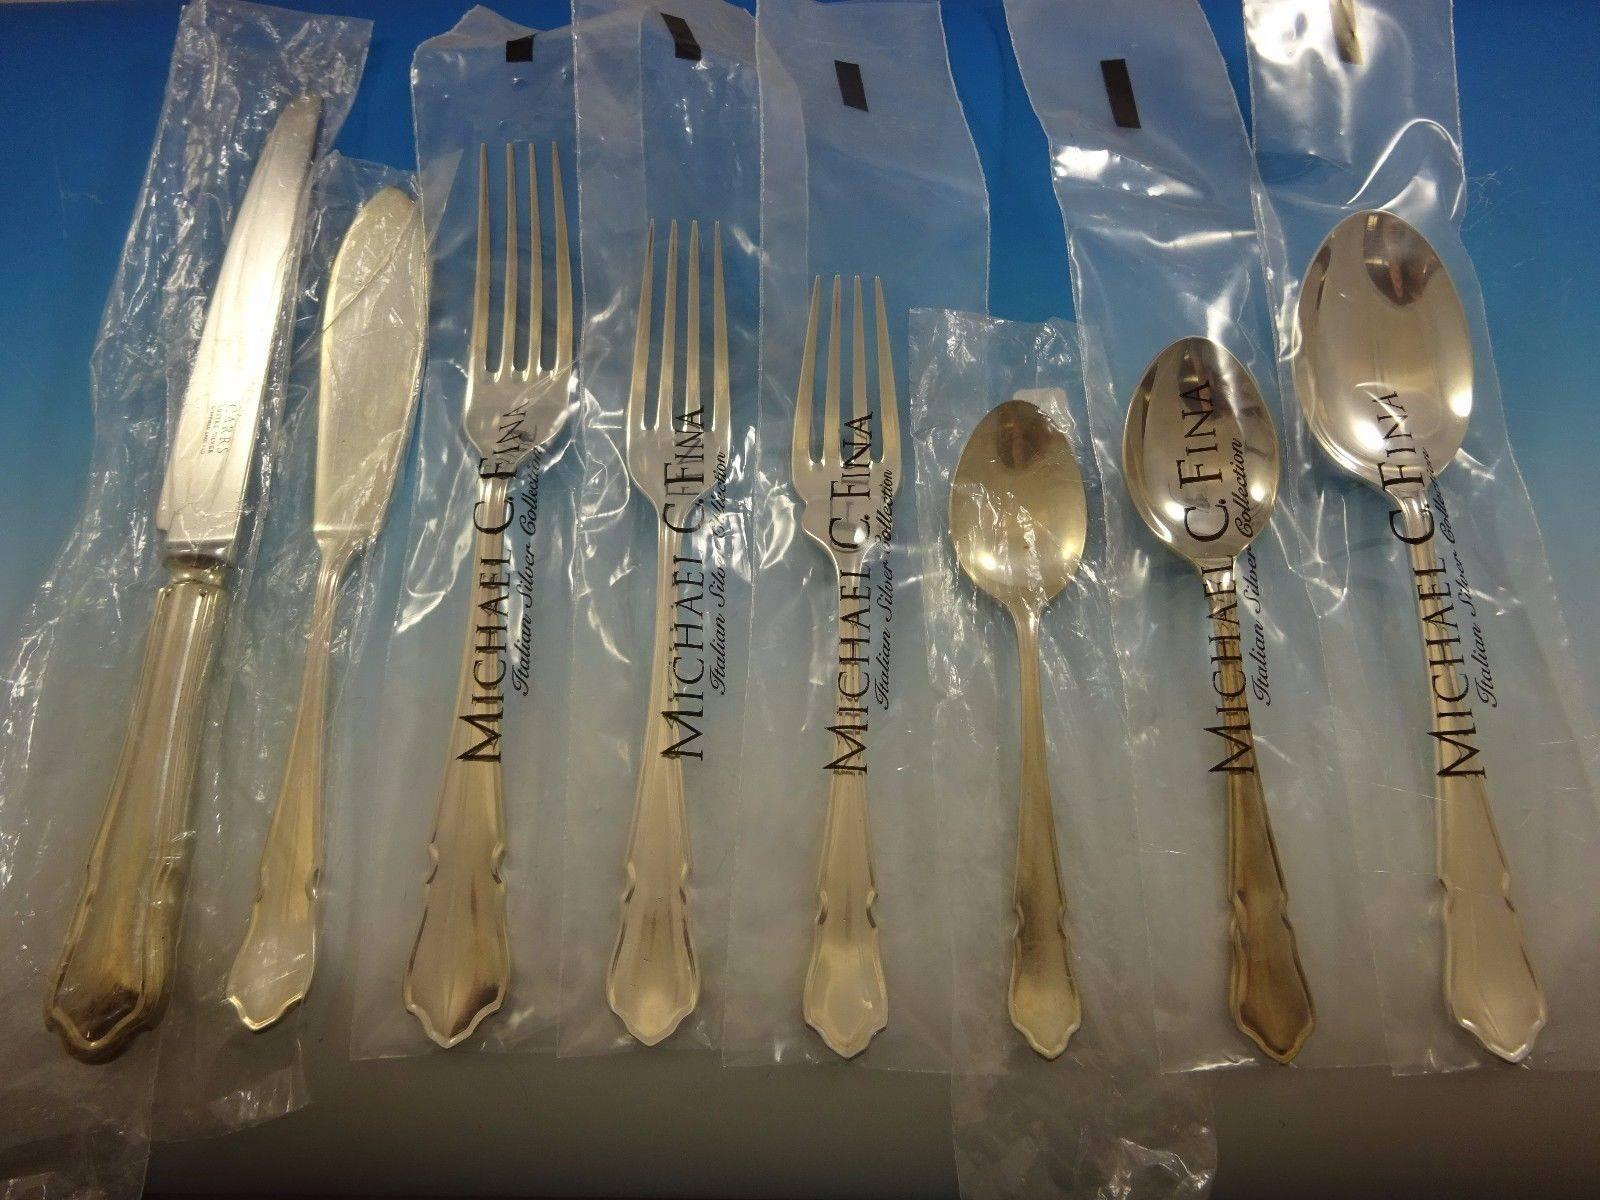 Huge Du Barry by Carrs sterling silver dinner size flatware set, 108 pieces. This set includes:
 
12 dinner knives, 9 7/8